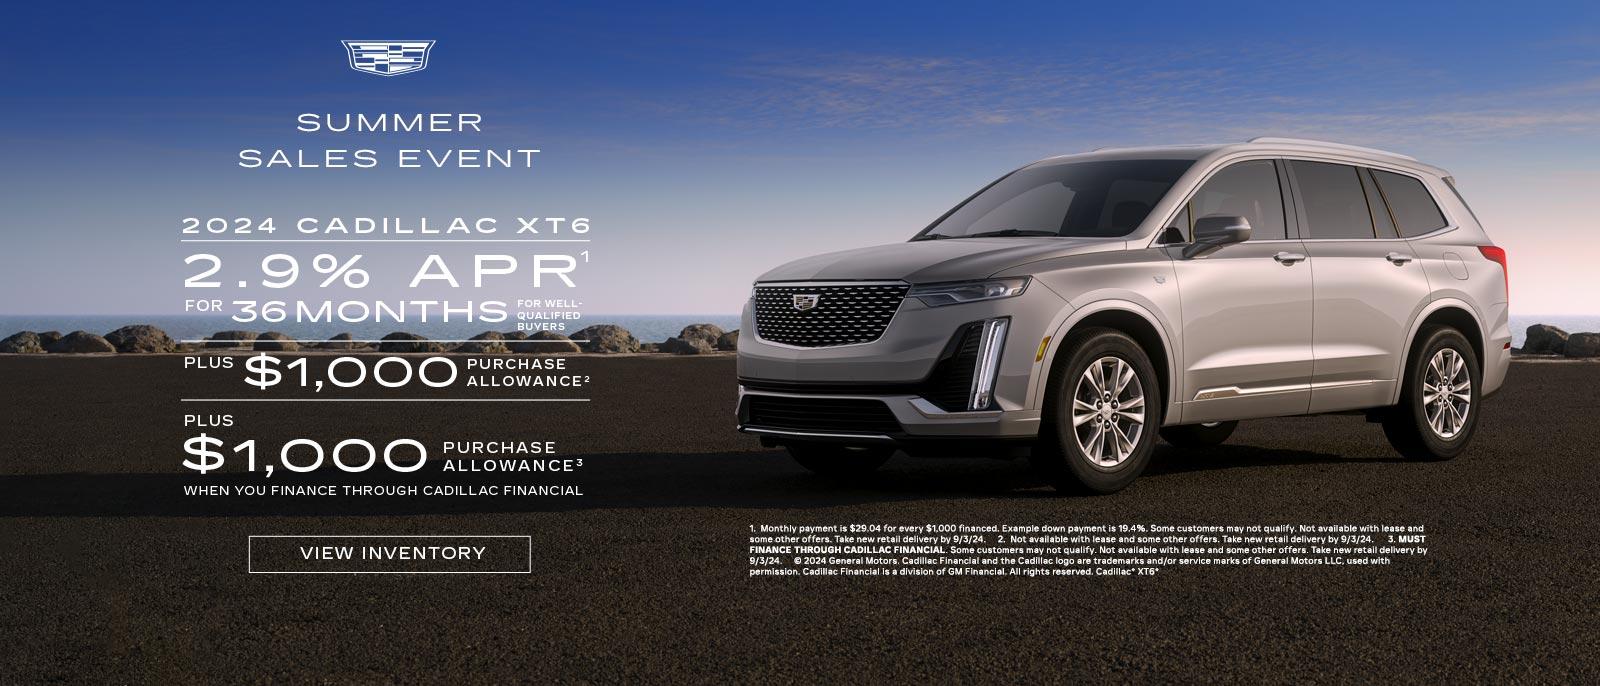 2024 Cadillac XT6. 2.9% APR for 36 months. Plus $1,000 purchase allowance. Plus $1,000 purchase allowance.